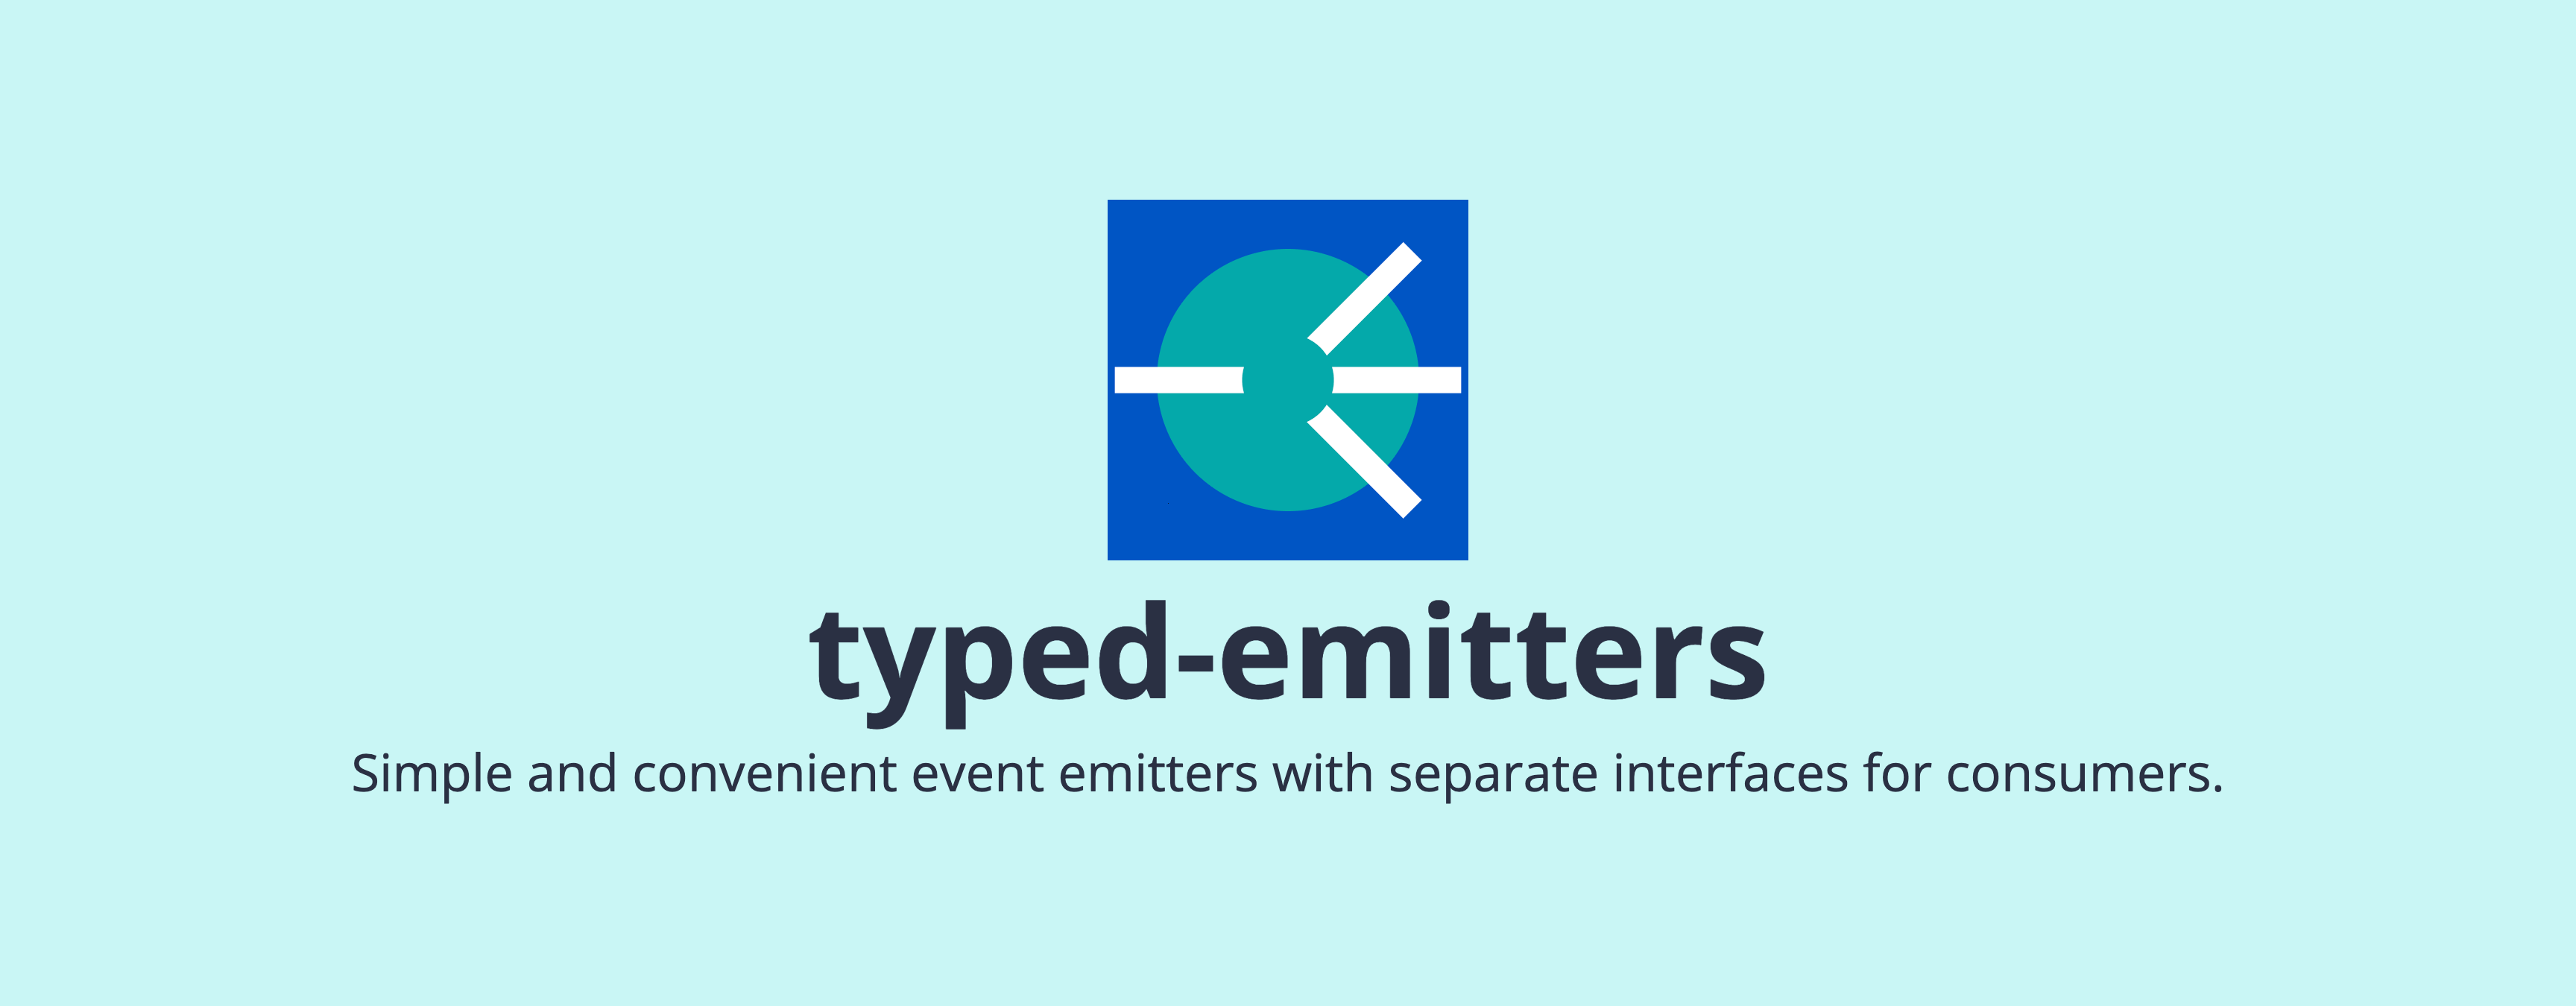 typed-emitters | Simple and convenient event emitters with separate interfaces for consumers.